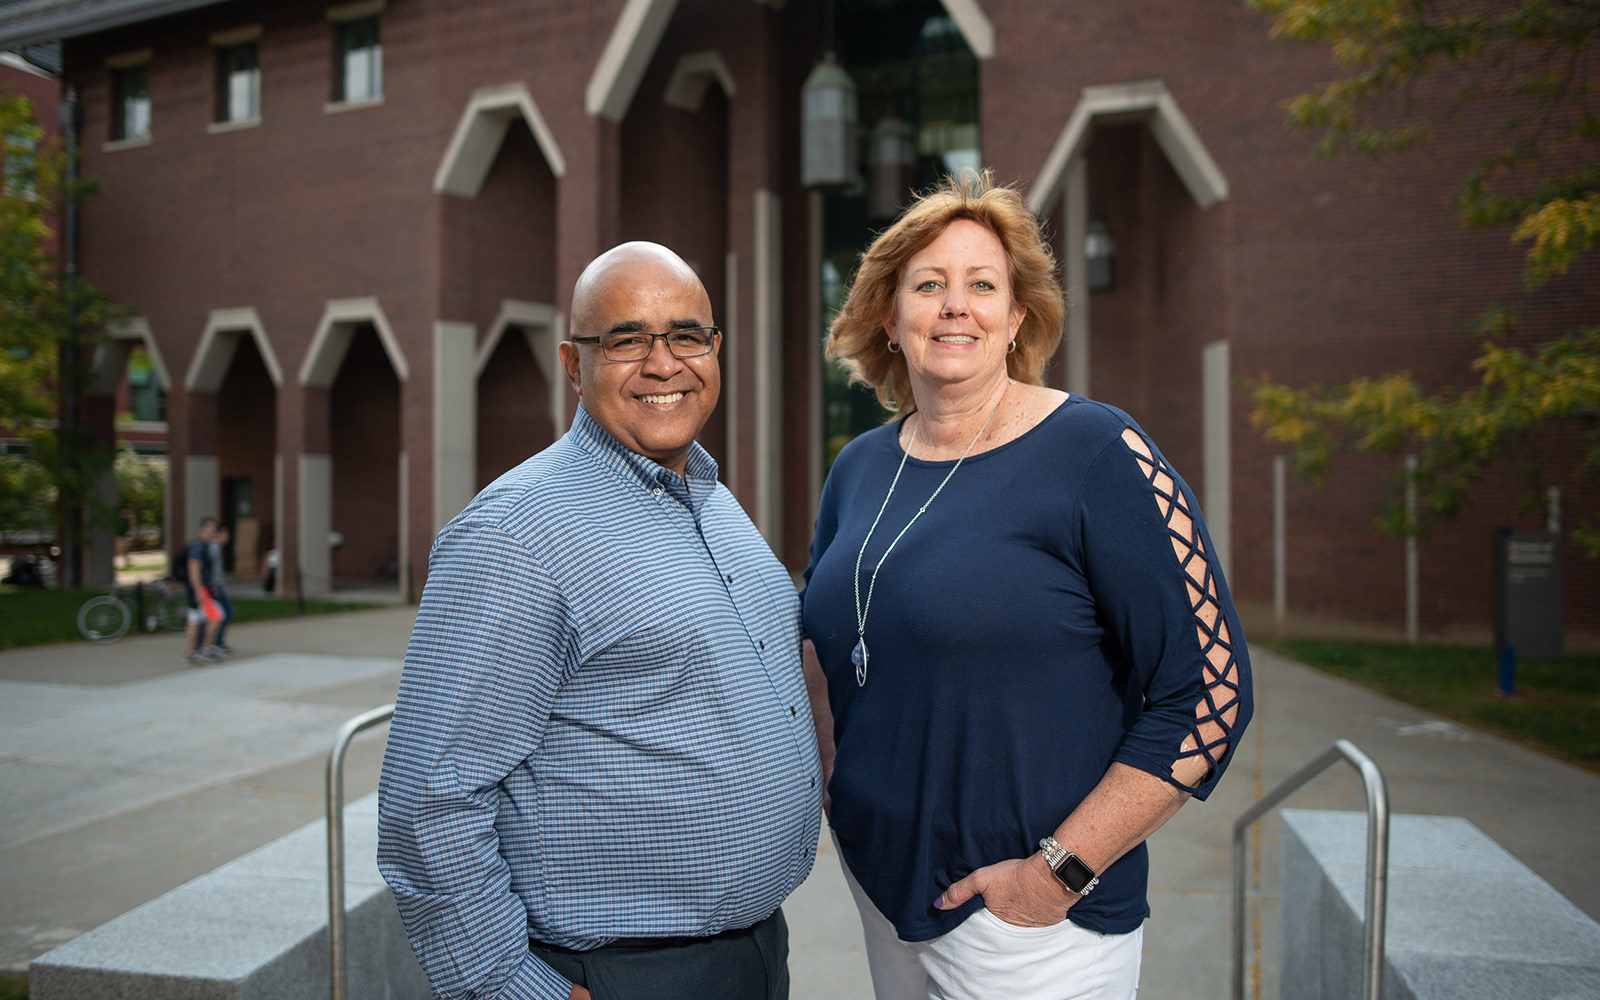 Jose M. Cruz (left) and Lucy Gilson (right) have been named associate deans in the UConn School of Business.  Gilson has taken on the mantle of associate dean for faculty and outreach, while Cruz is now the associate dean for graduate programs. (Nathan Oldham / UConn School of Business)